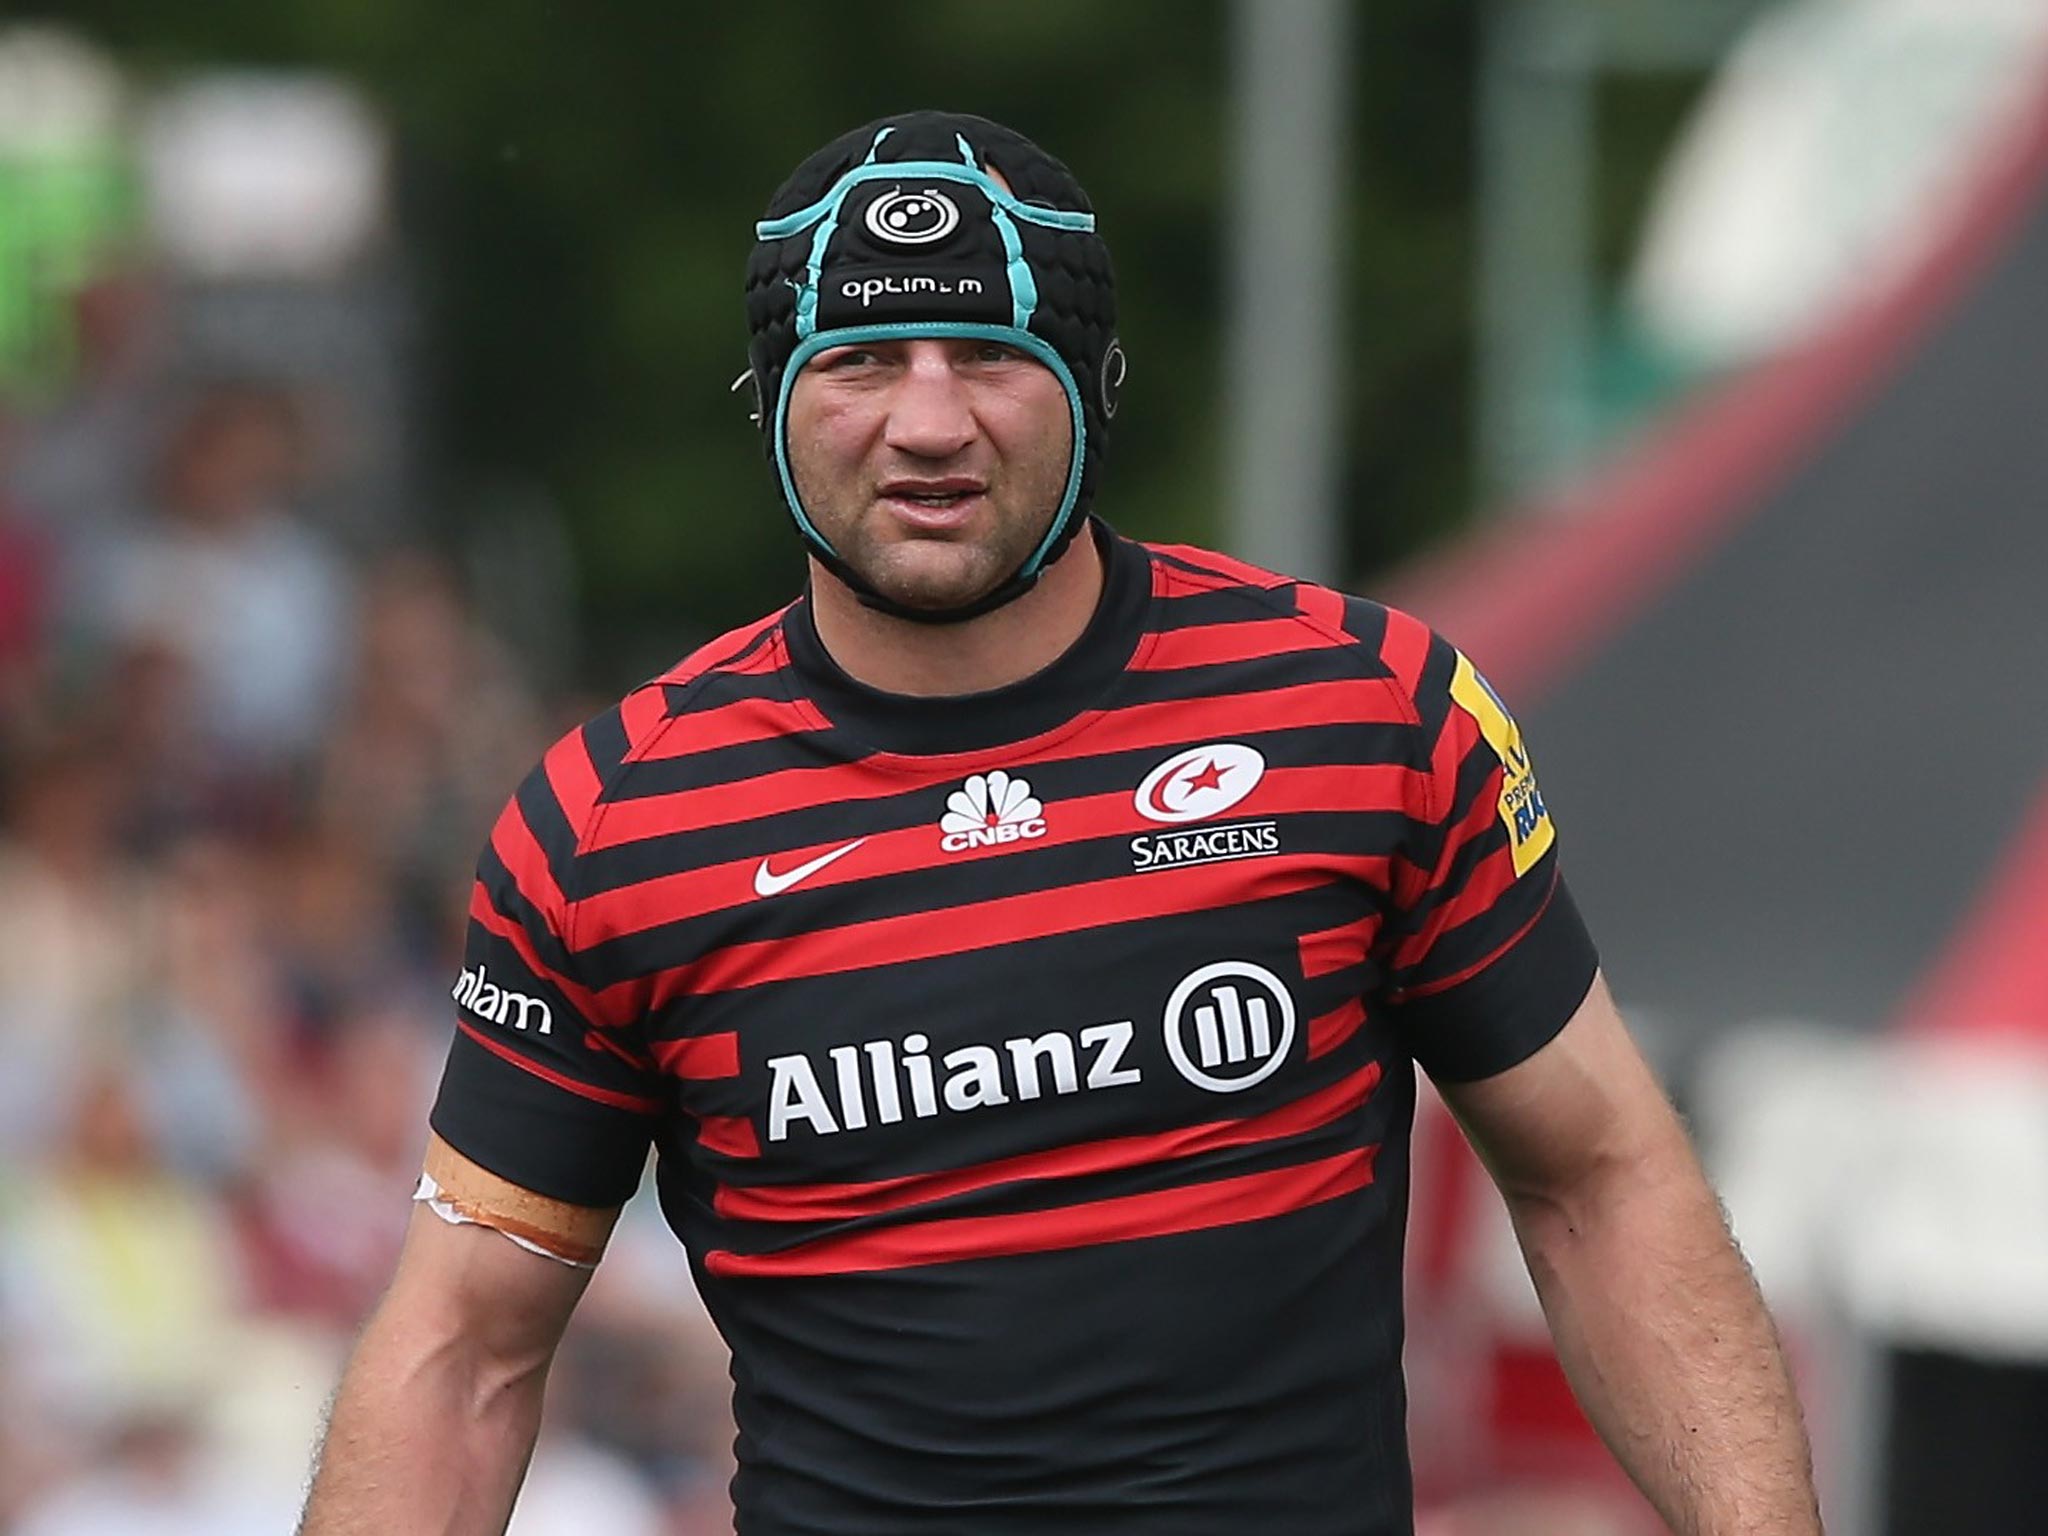 Steve Borthwick was rated at 50-50 on Tuesday to face Toulon